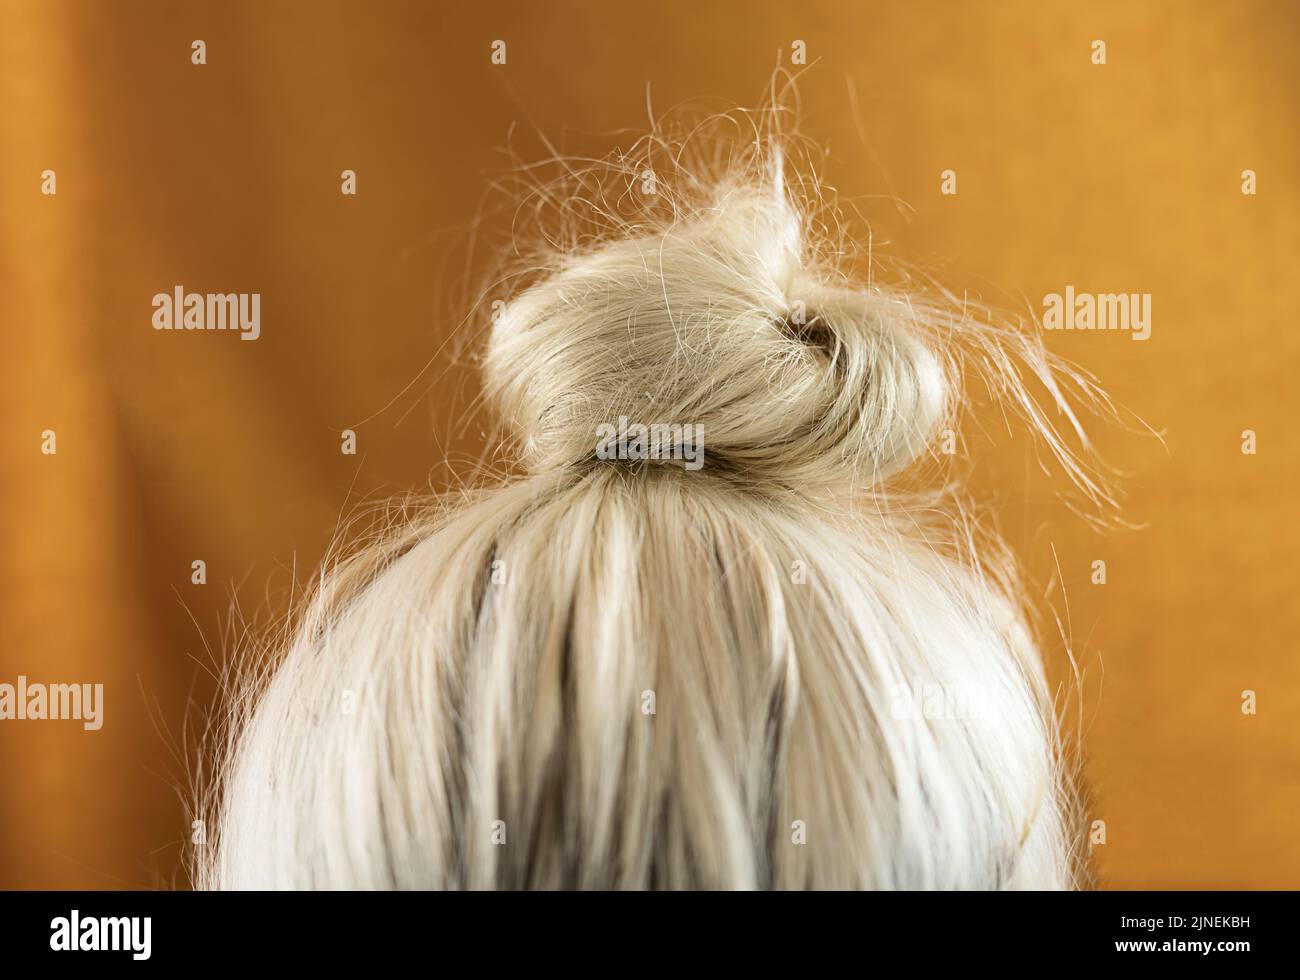 Close up of blonde hair that is put up in a casual messy hair bun and hairstyle. Stock Photo